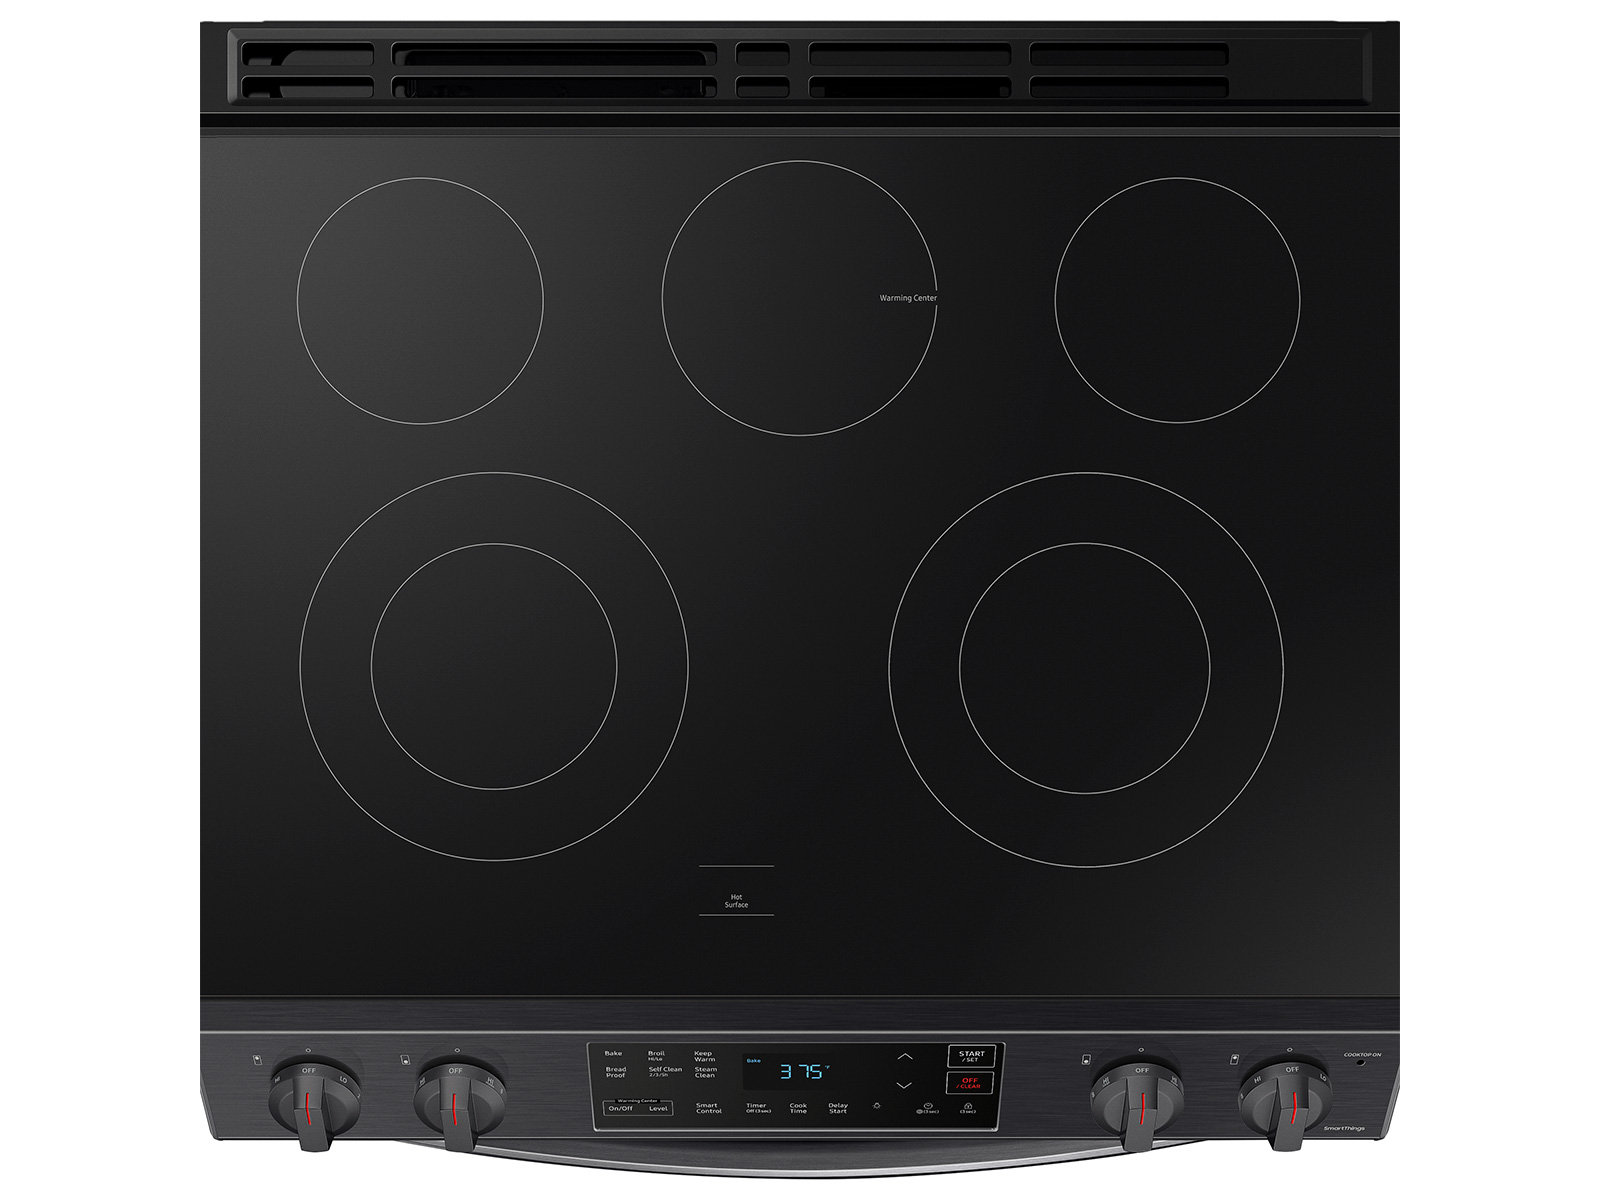 27 in. - Electric Ranges - Ranges - The Home Depot